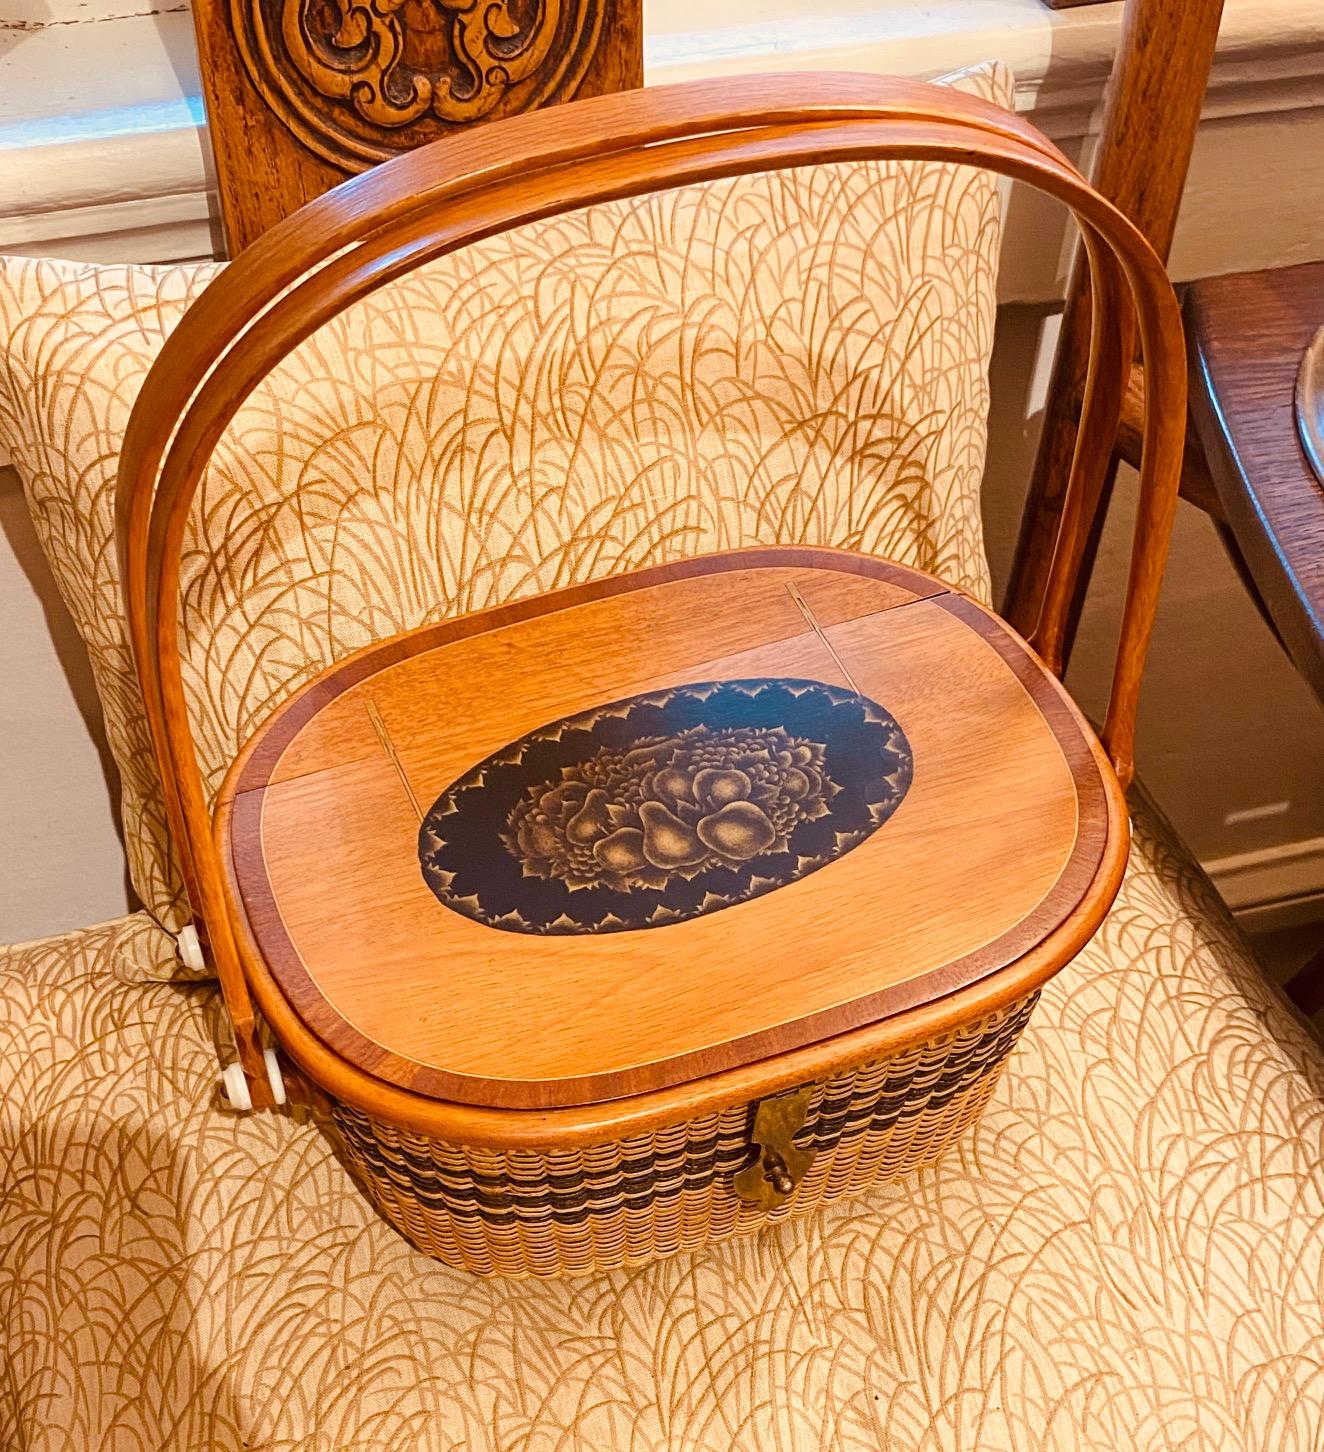 Nantucket Basket by Harry Hilbert, 1995, a Nantucket purse having a solid mahogany hinged top with colonial or federal style stenciled decoration on ebonized reserve, fine brass hinges minutely inlaid, and tropic wood cross-band inlay around